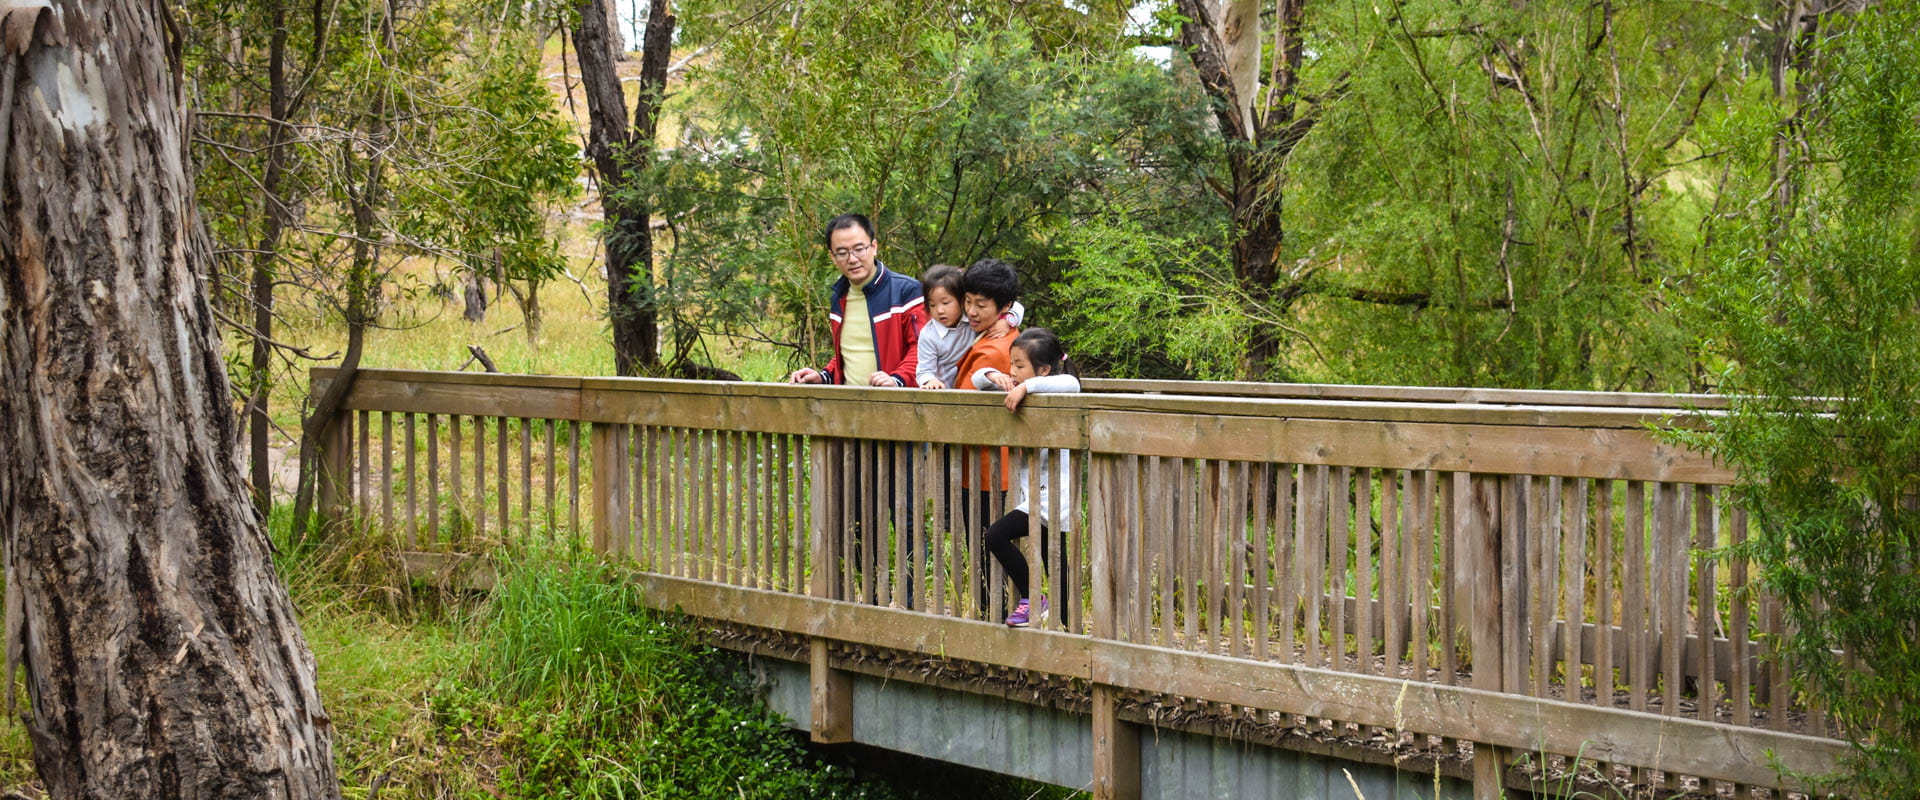 A family are stopped on a footbridge looking down into a body of water. They're surrounded by trees and green parklands. 